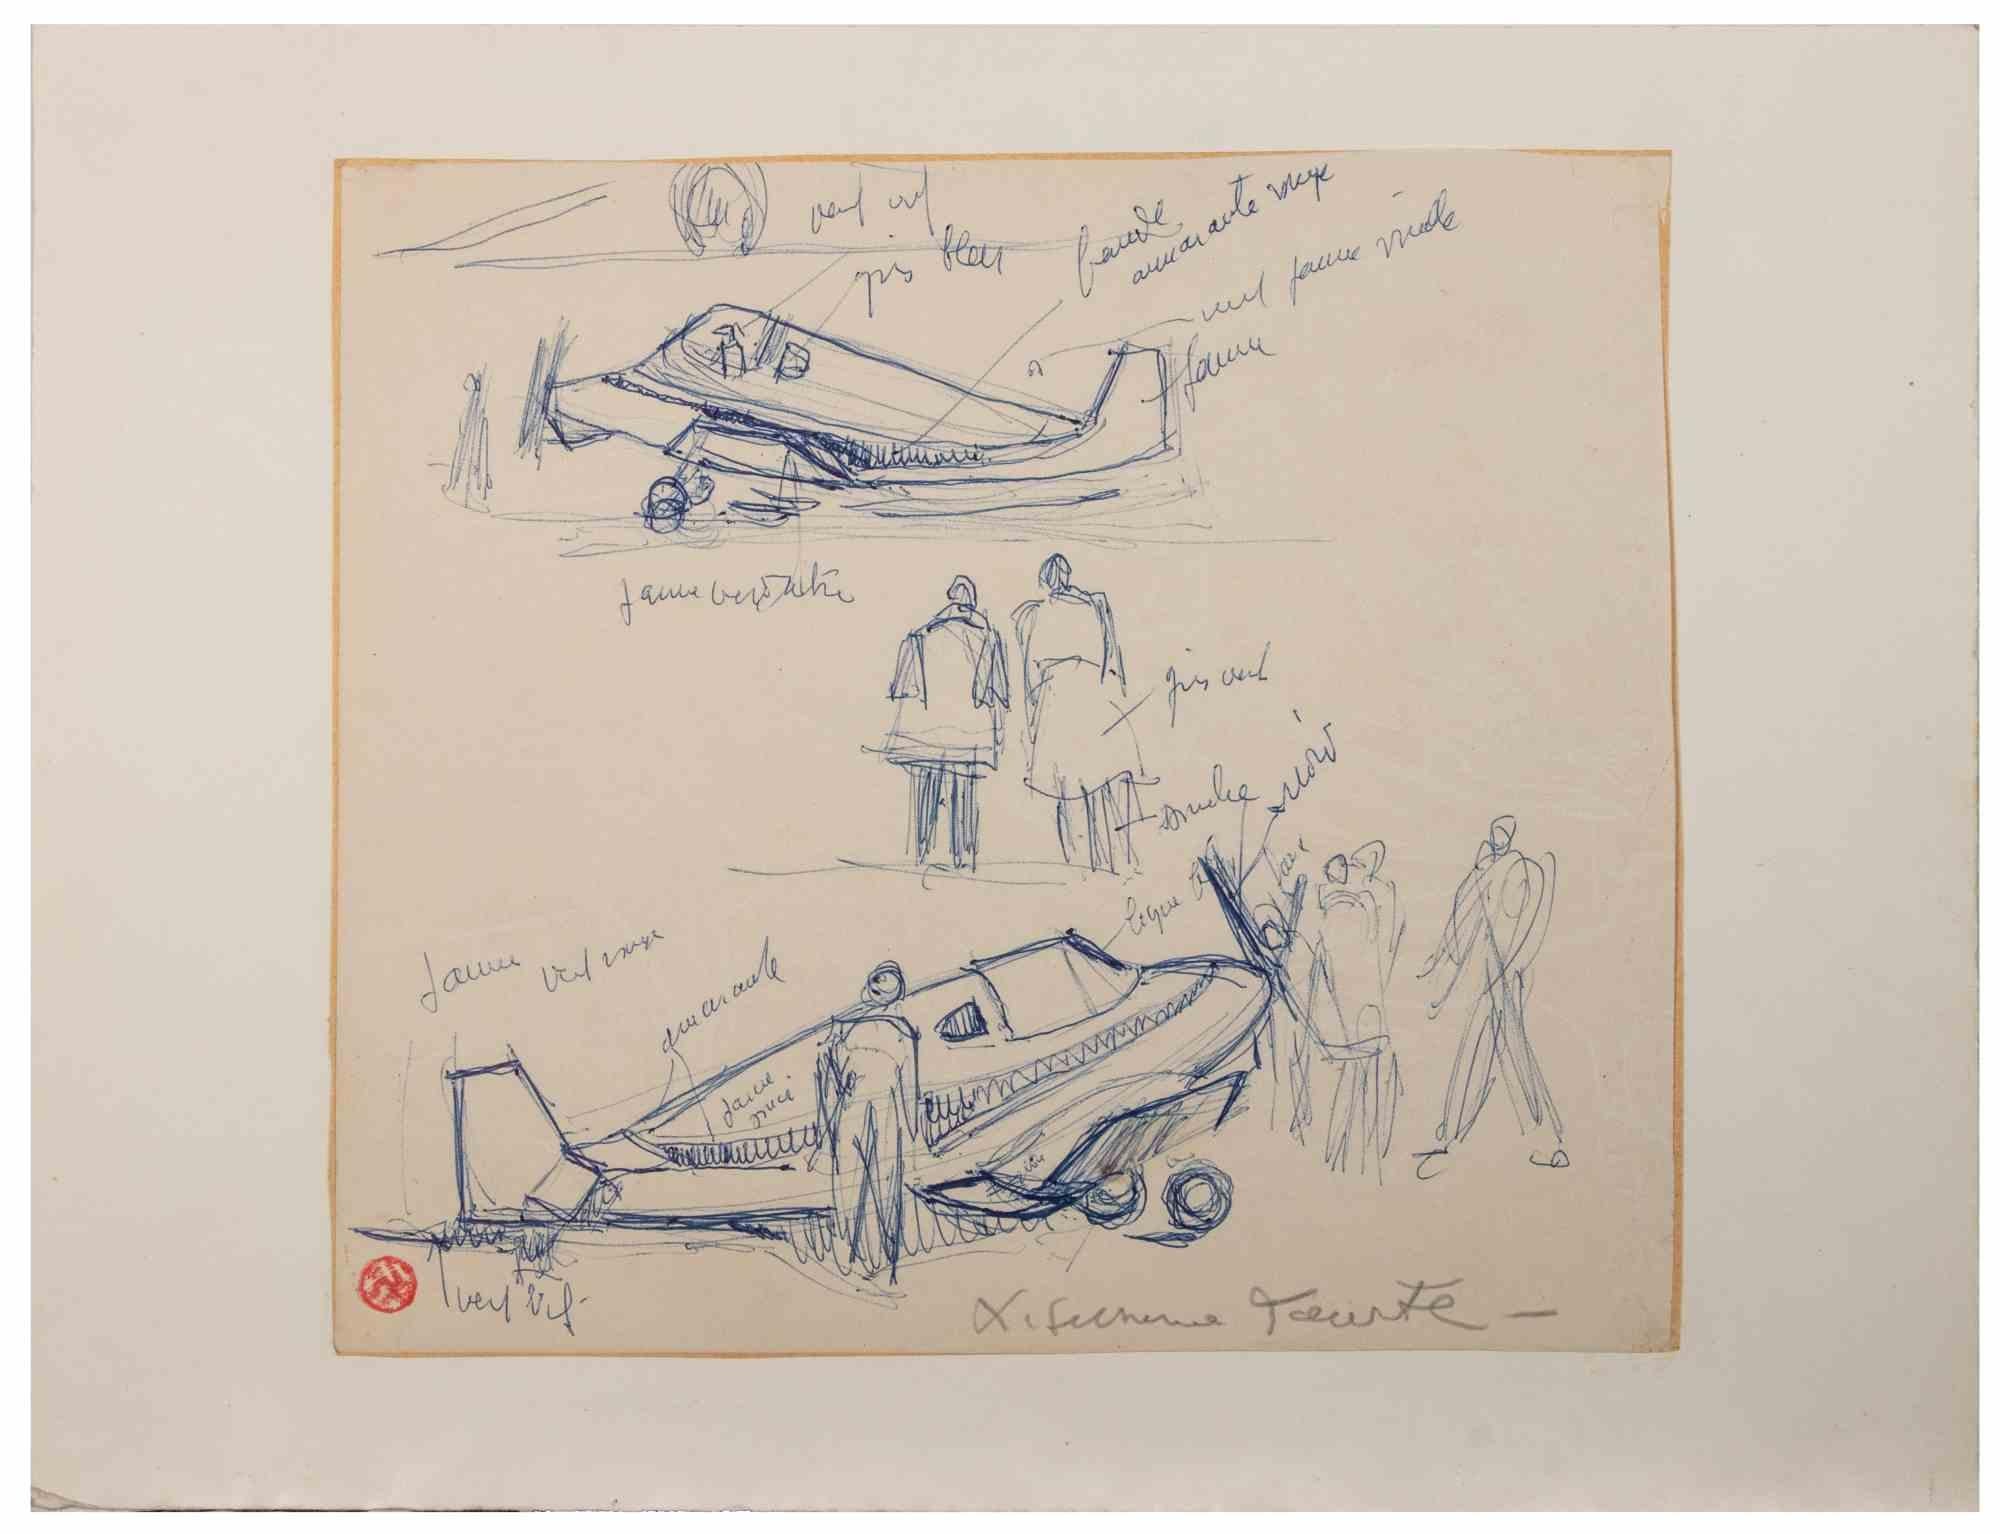 The airport  is an artwork realized by Suzanne Tourte, in 1940s. 

Pen on paper.

Handisgned in the lower margin and artist's stamp on the right side. 

20 x 23 cm. 

Good conditions, except for some yellowing due to time. 

 

Suzanne Tourte, born